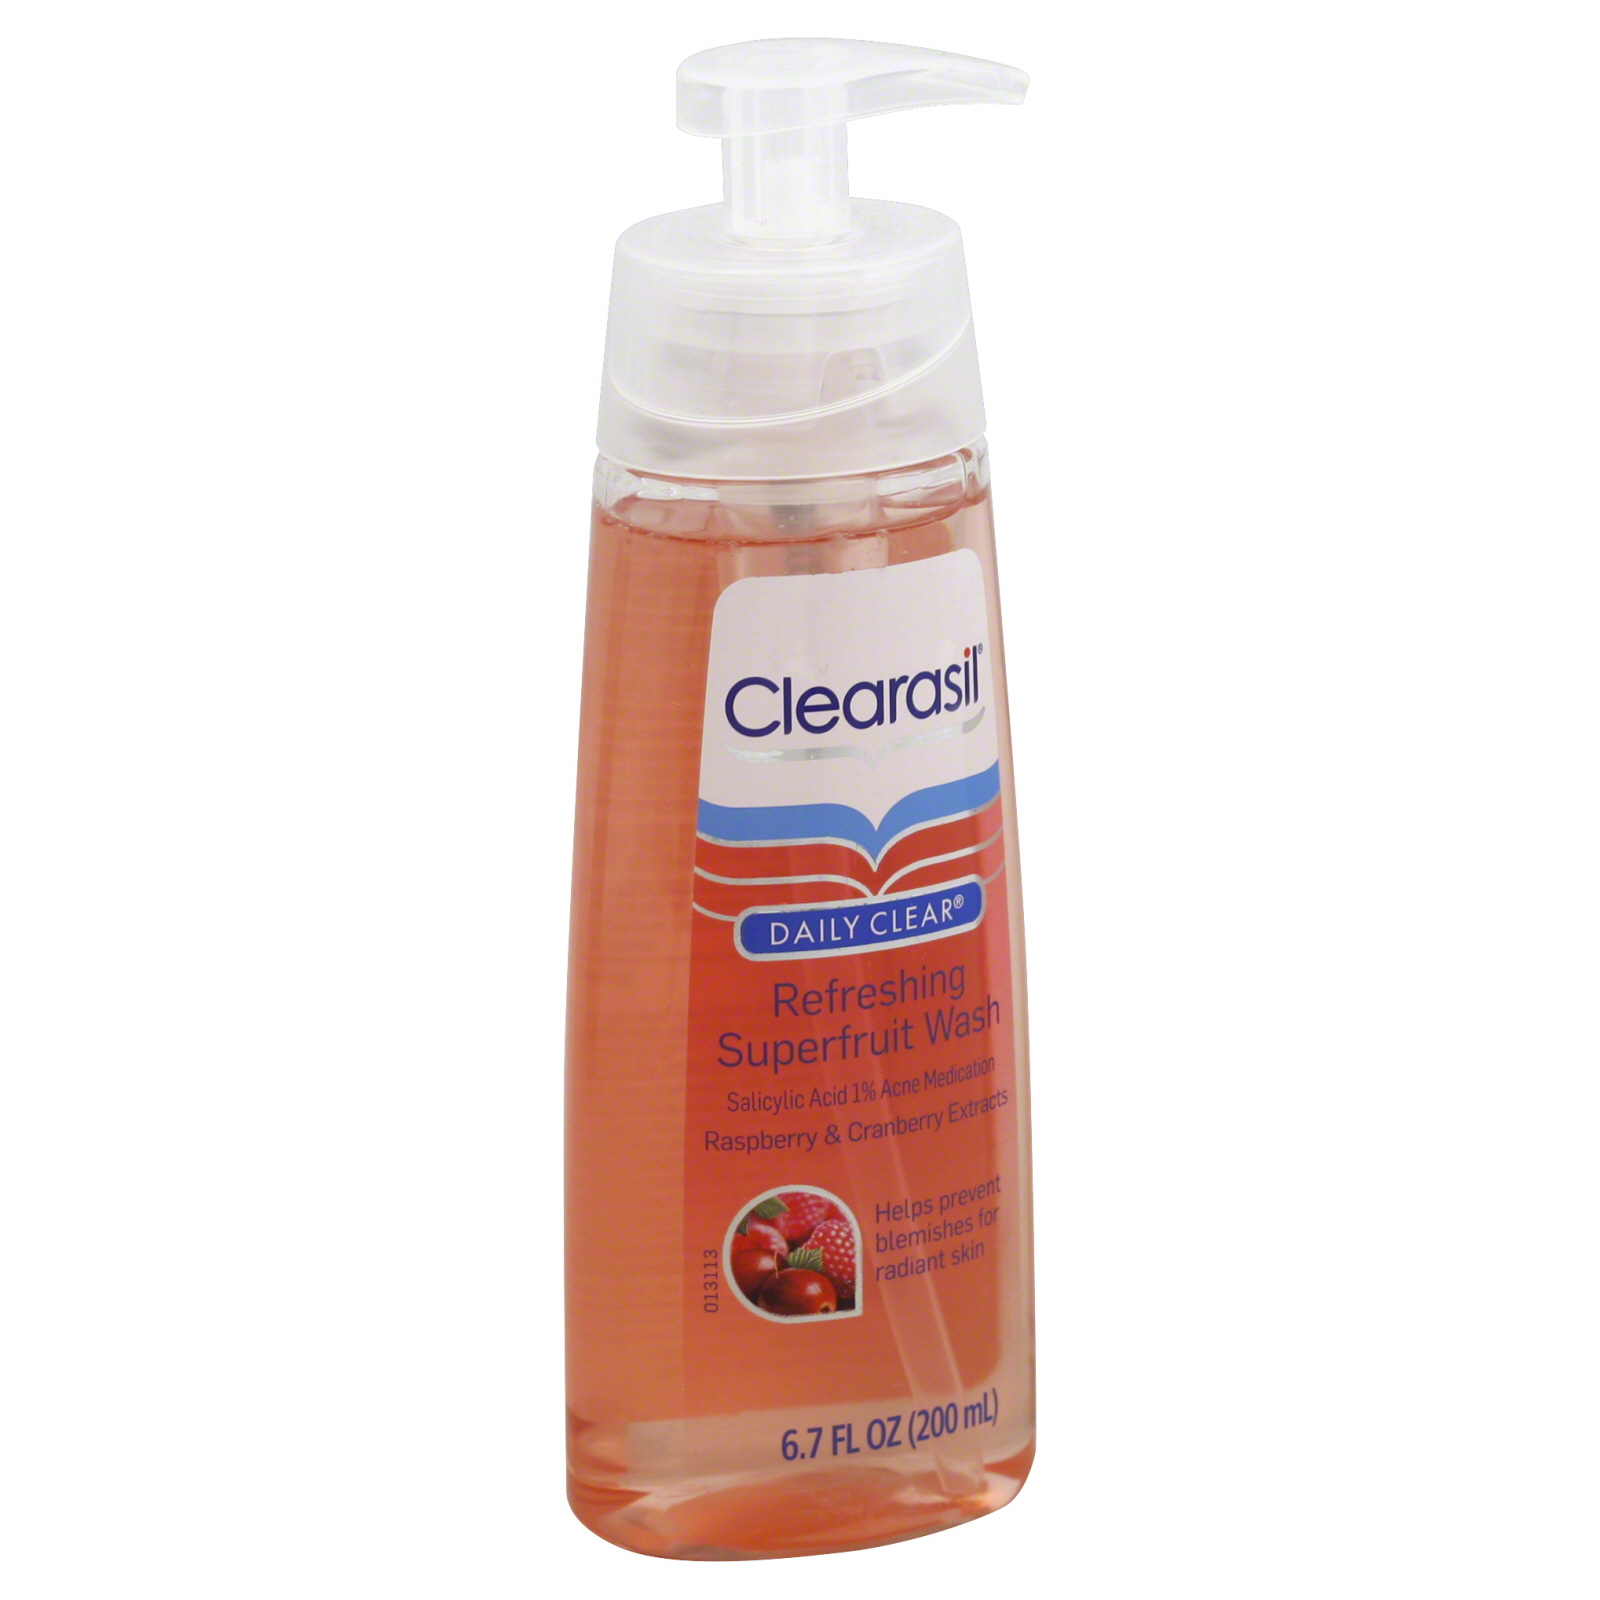 *HOT* Clearasil on Clearance for $1.50 + Free Pickup!